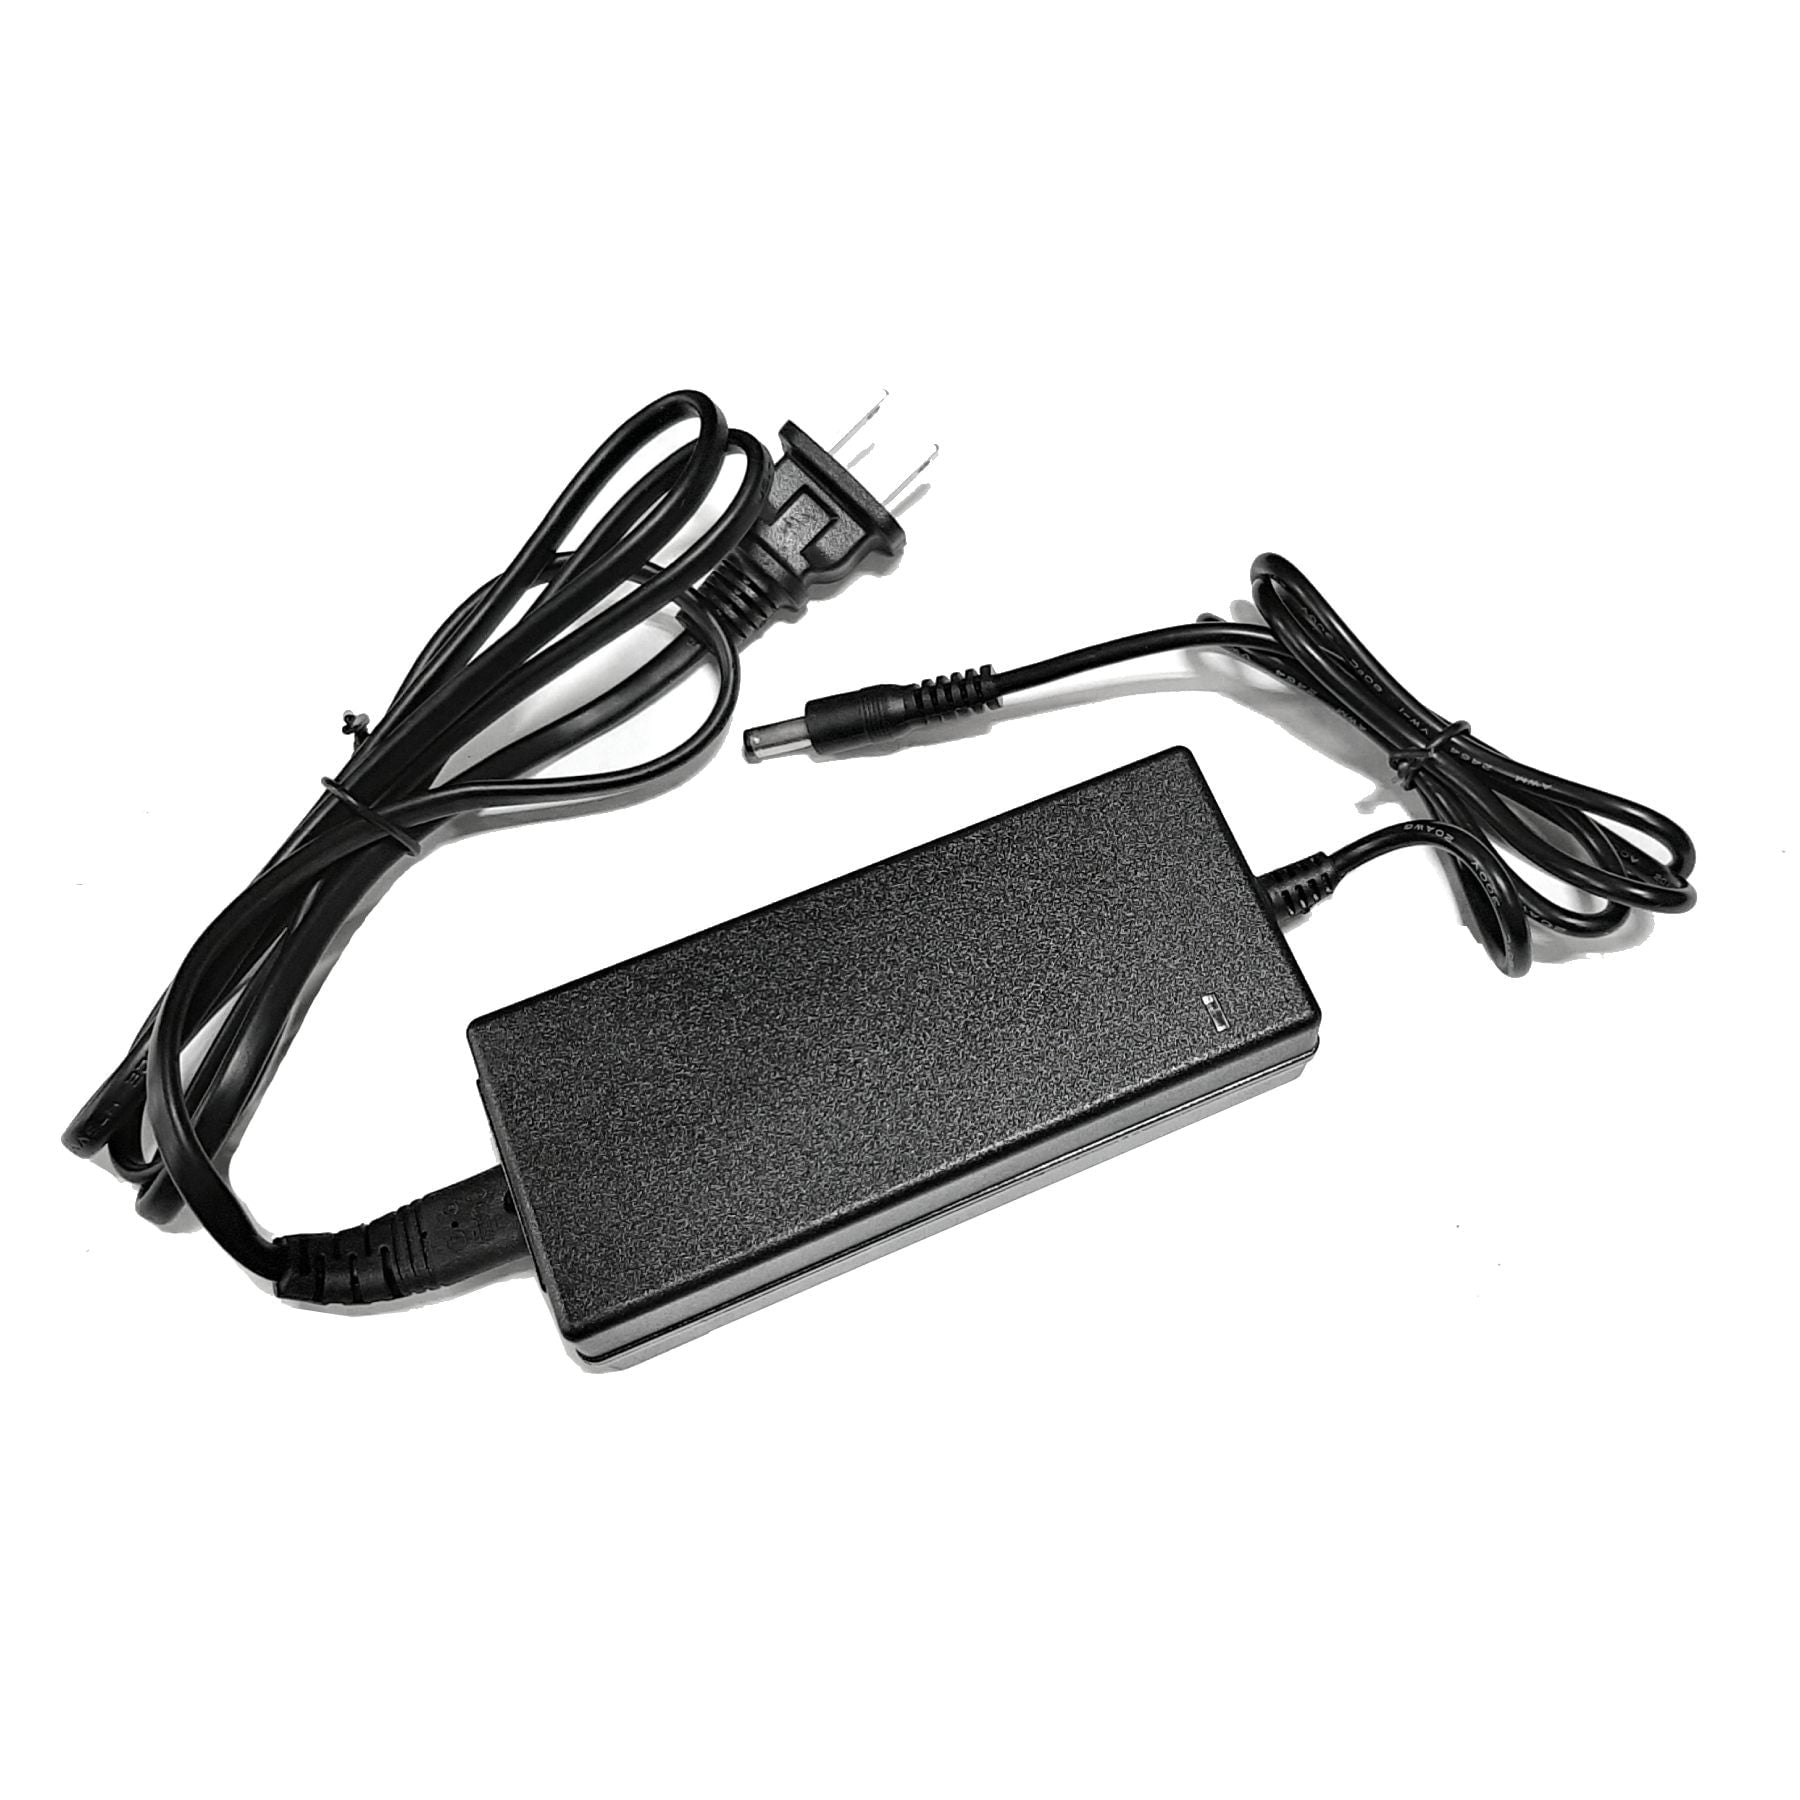 36 Volt Lithium Battery Charger for the Powerboard Hoverboard 